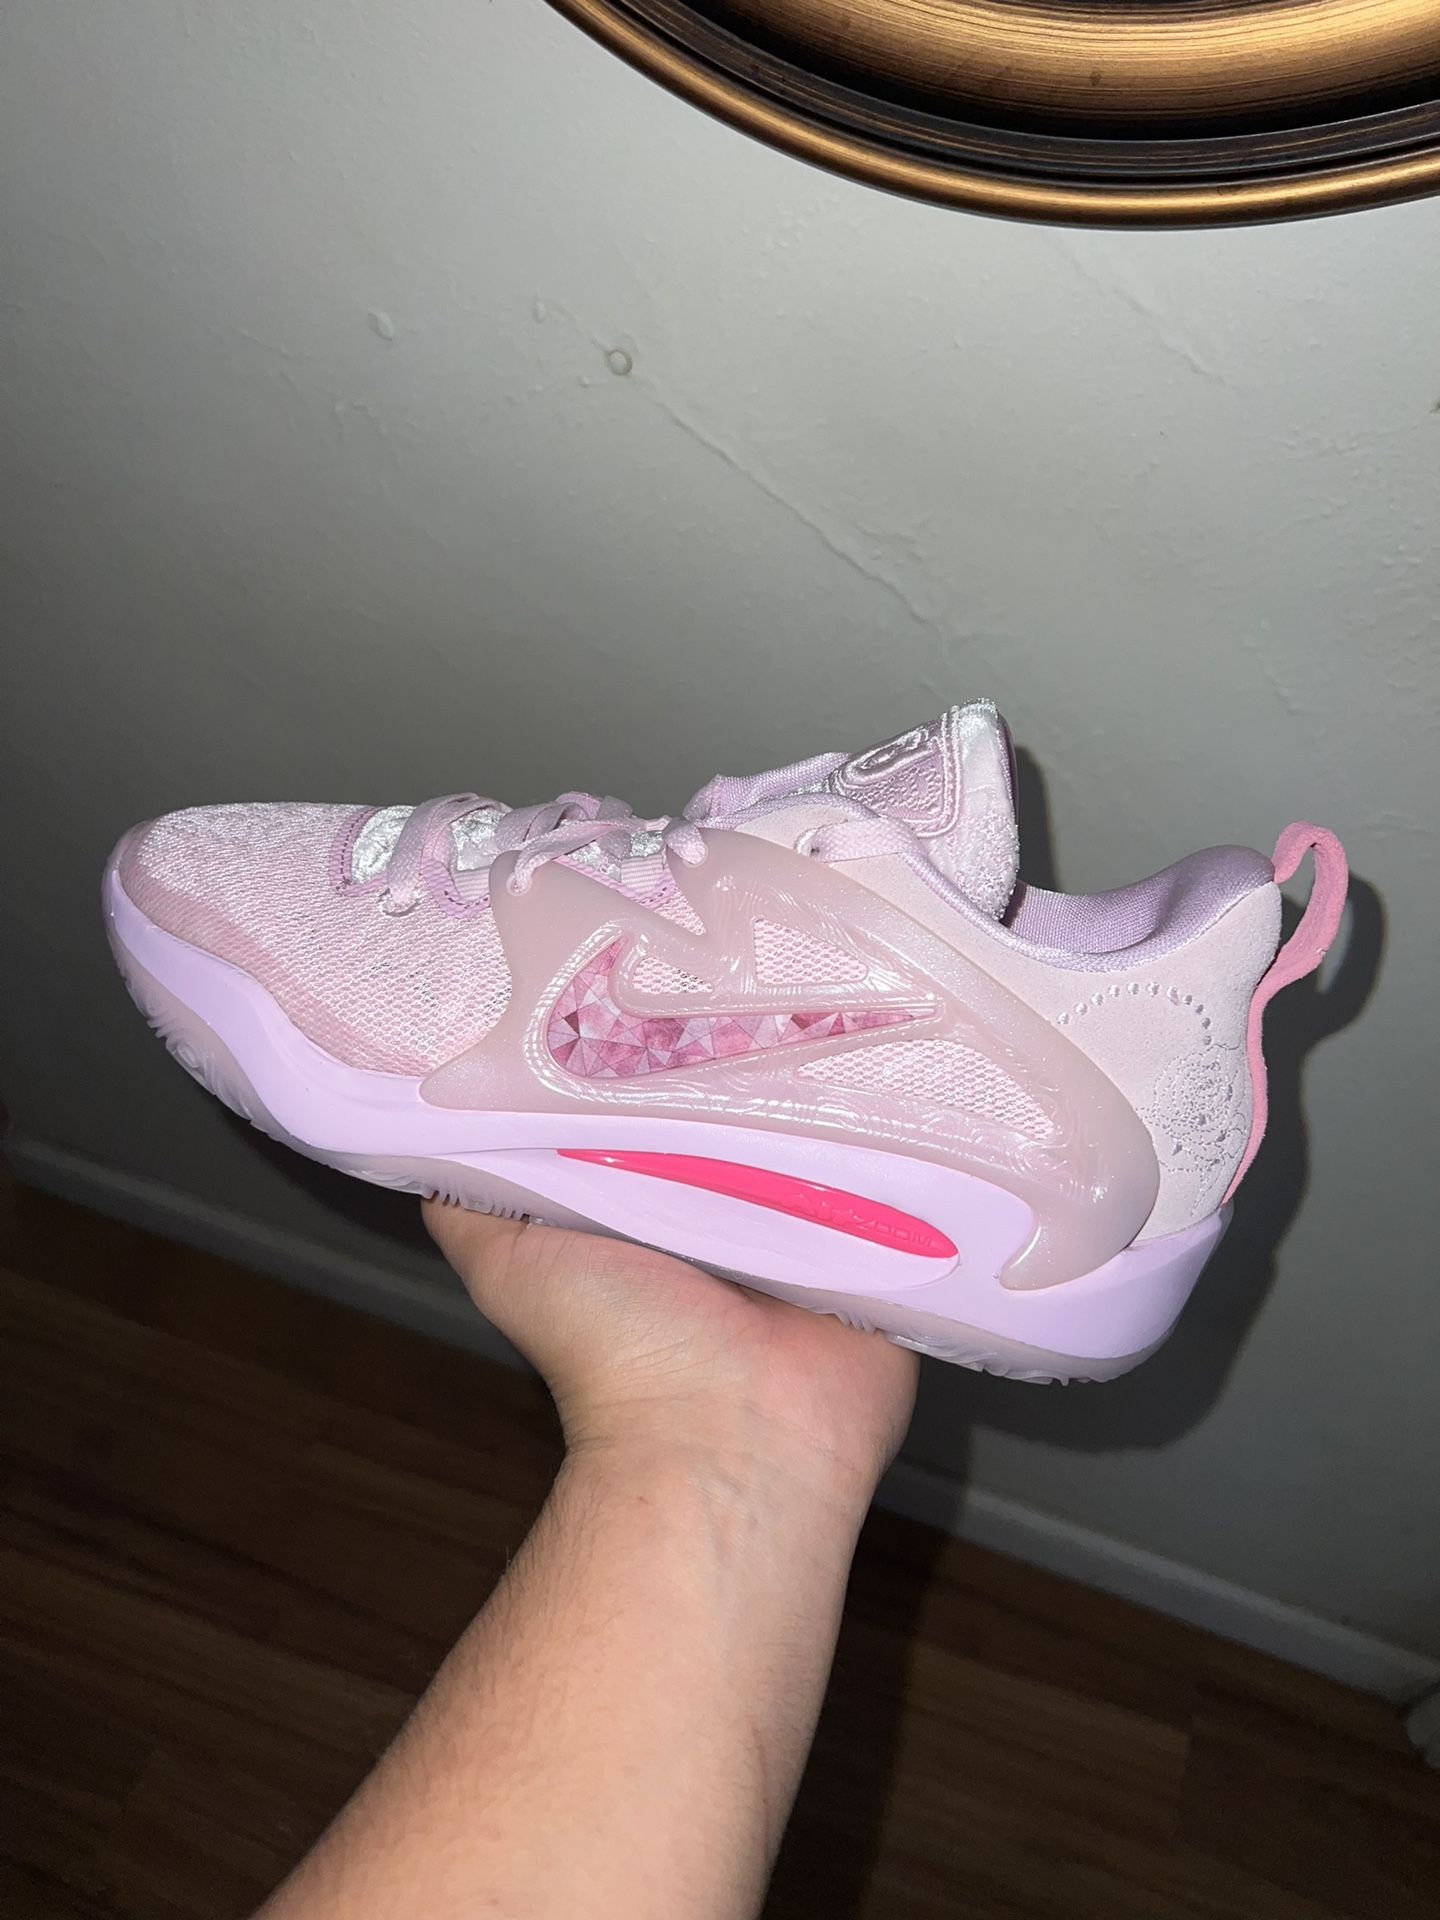 KD 15 “Aunt Pearl”